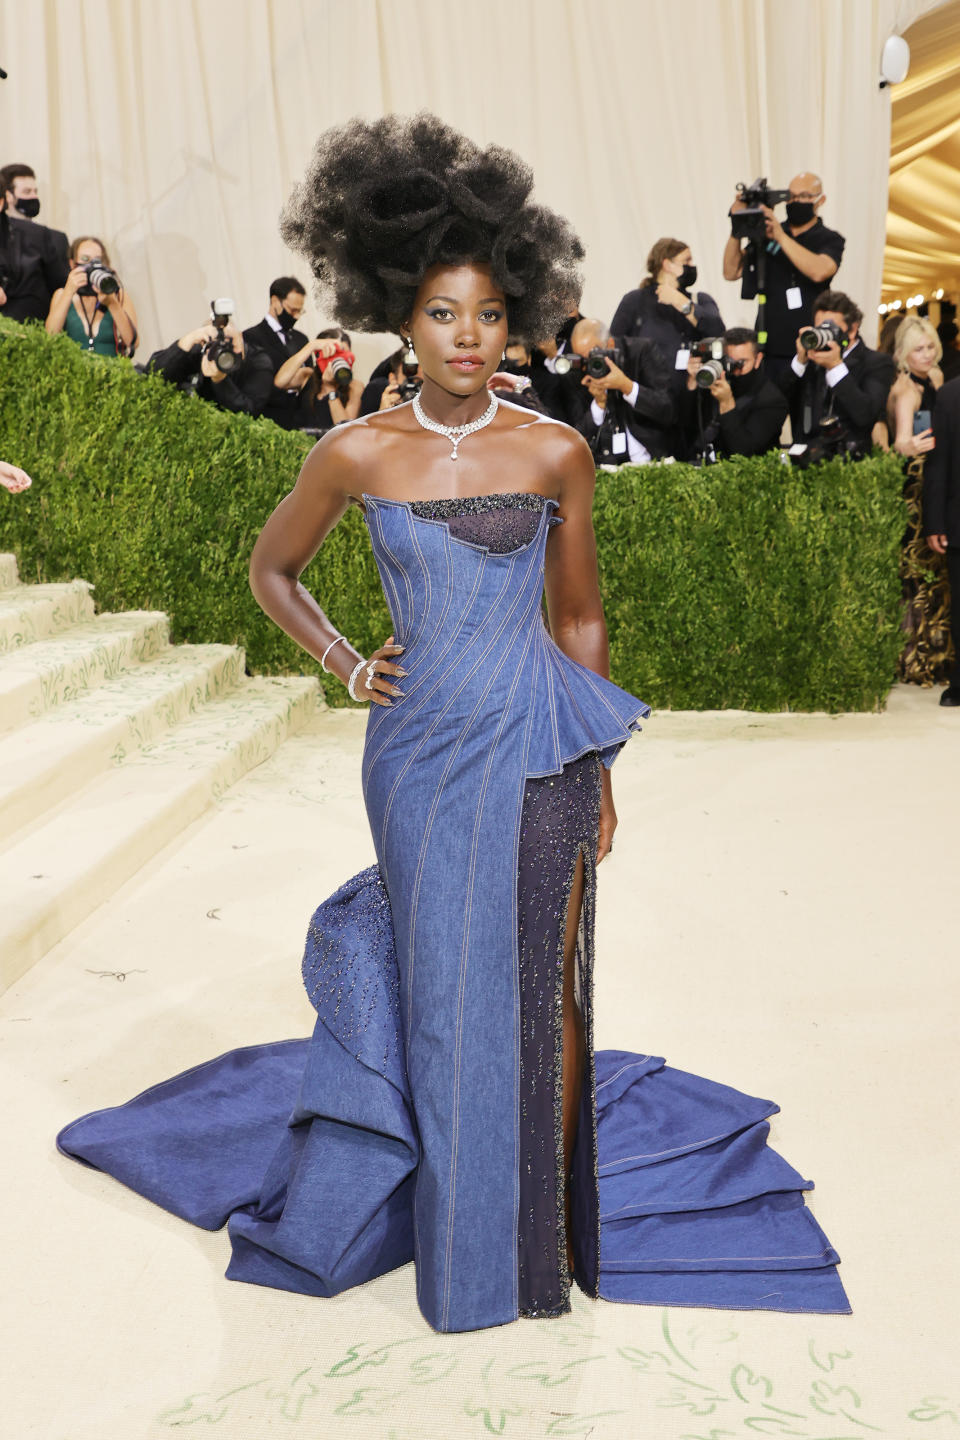 Lupita Nyong'o attends The 2021 Met Gala Celebrating In America: A Lexicon Of Fashion at Metropolitan Museum of Art on September 13, 2021 in New York City. (Getty Images)